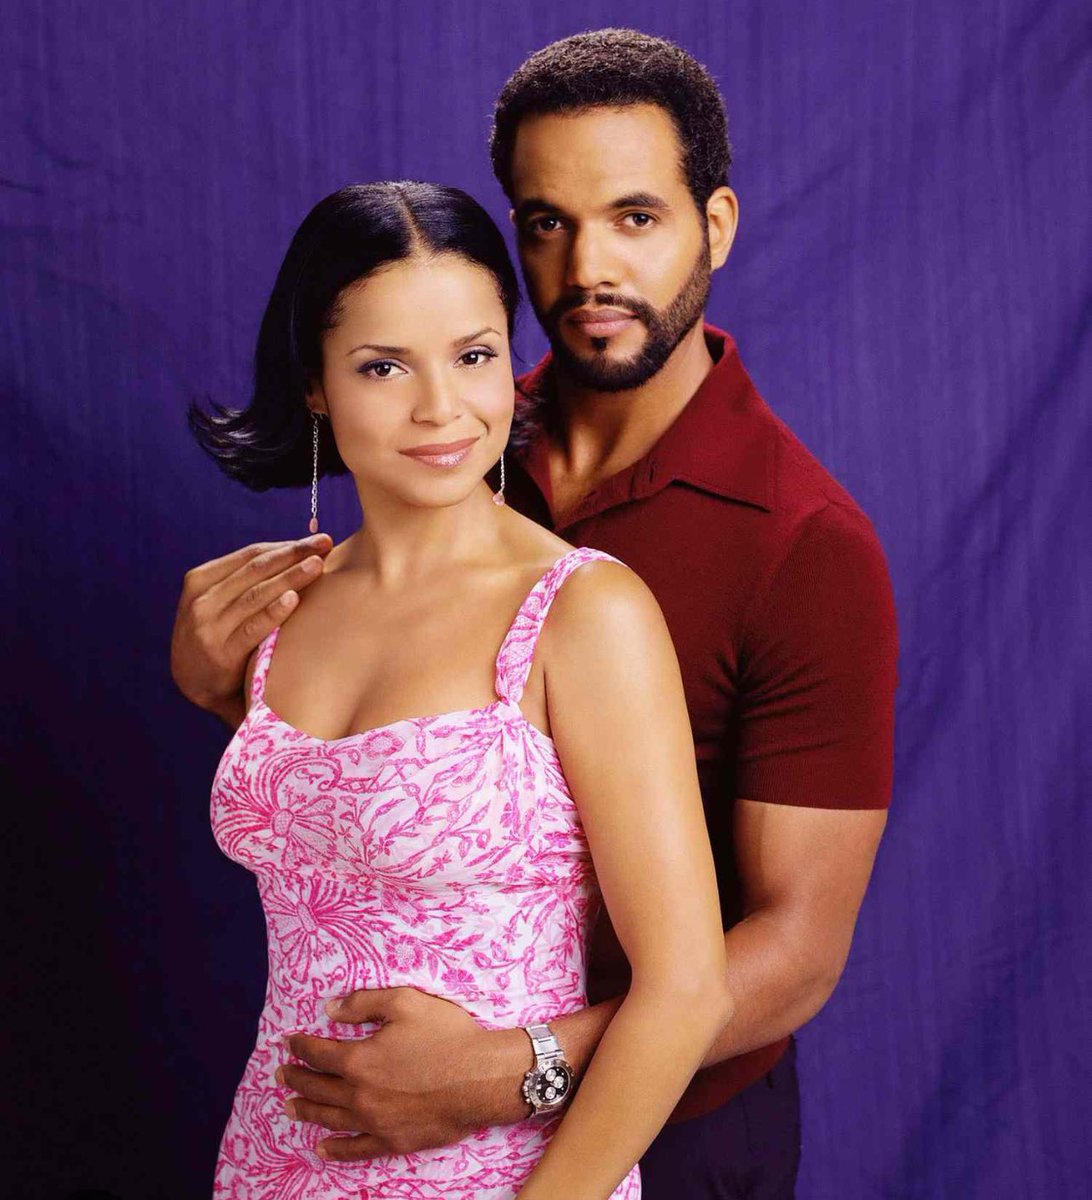 Celebrating 3x Emmy-nominated actress Victoria Rowell on her birthday with a loving memory from “The Young and the Restless.”

#YoungandRestless #YR @victoriarowell